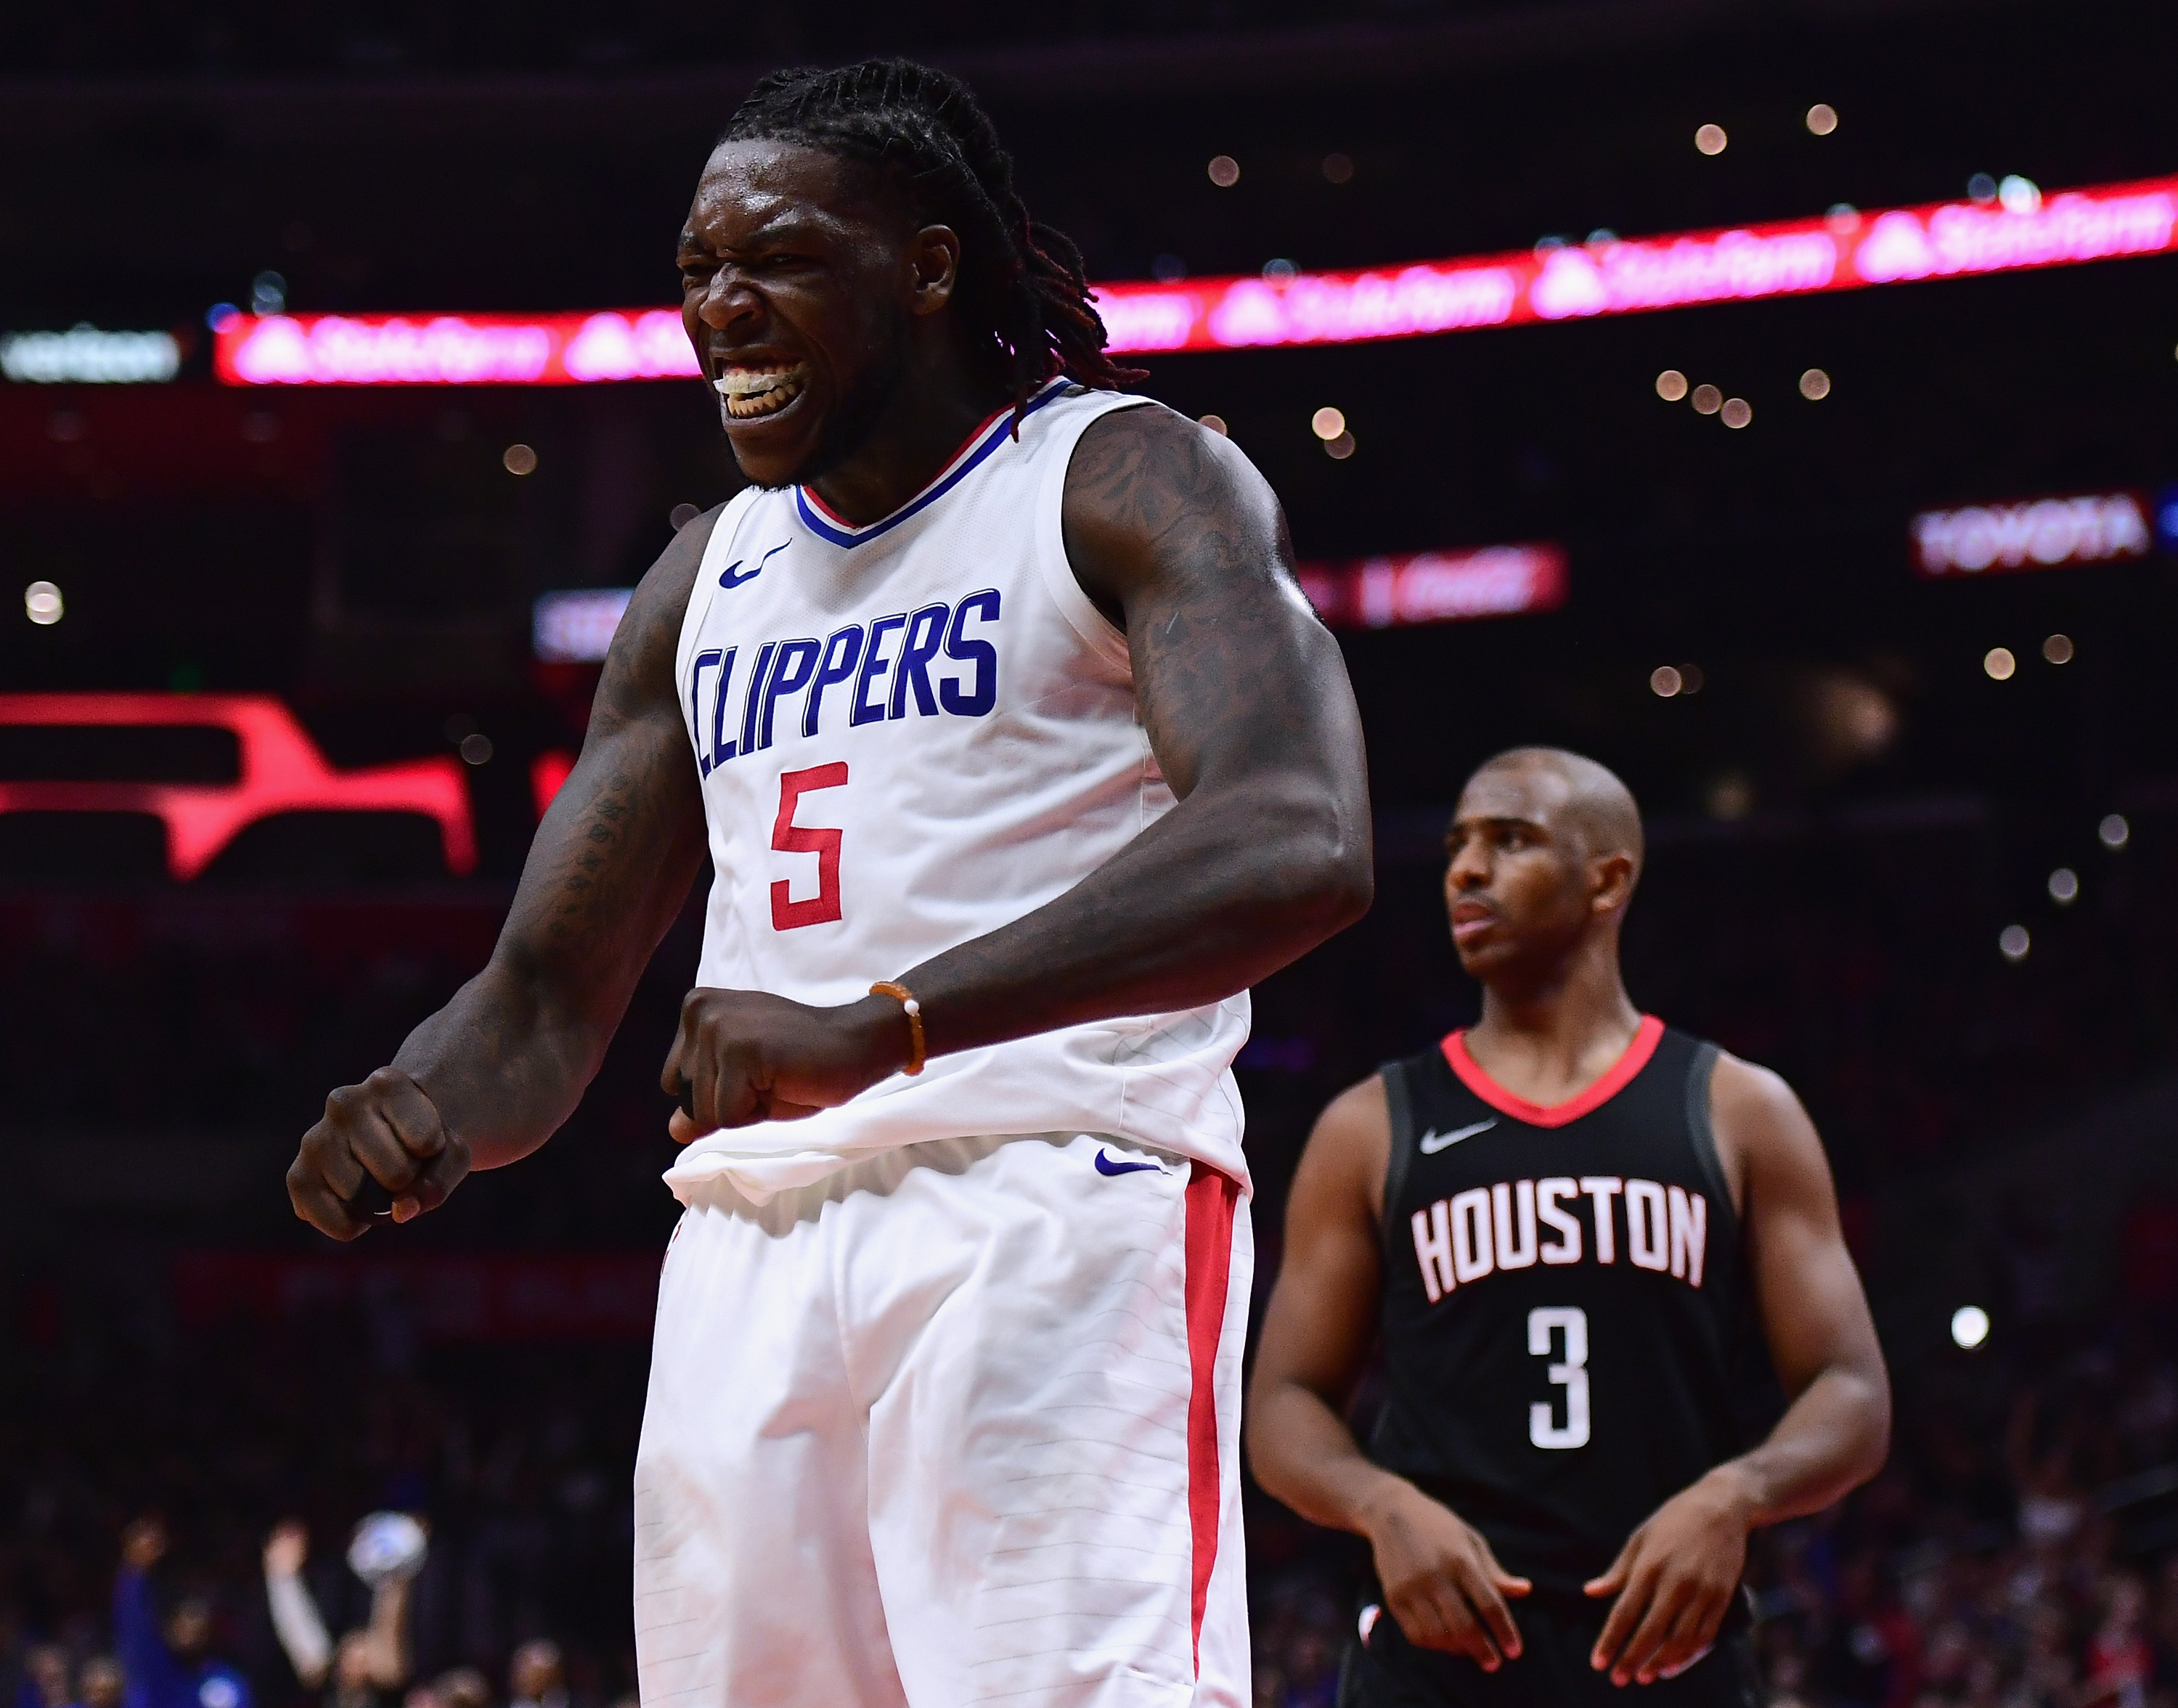 Montrezl Harrell tired of Clippers being disrespected by Lakers fans in  L.A.